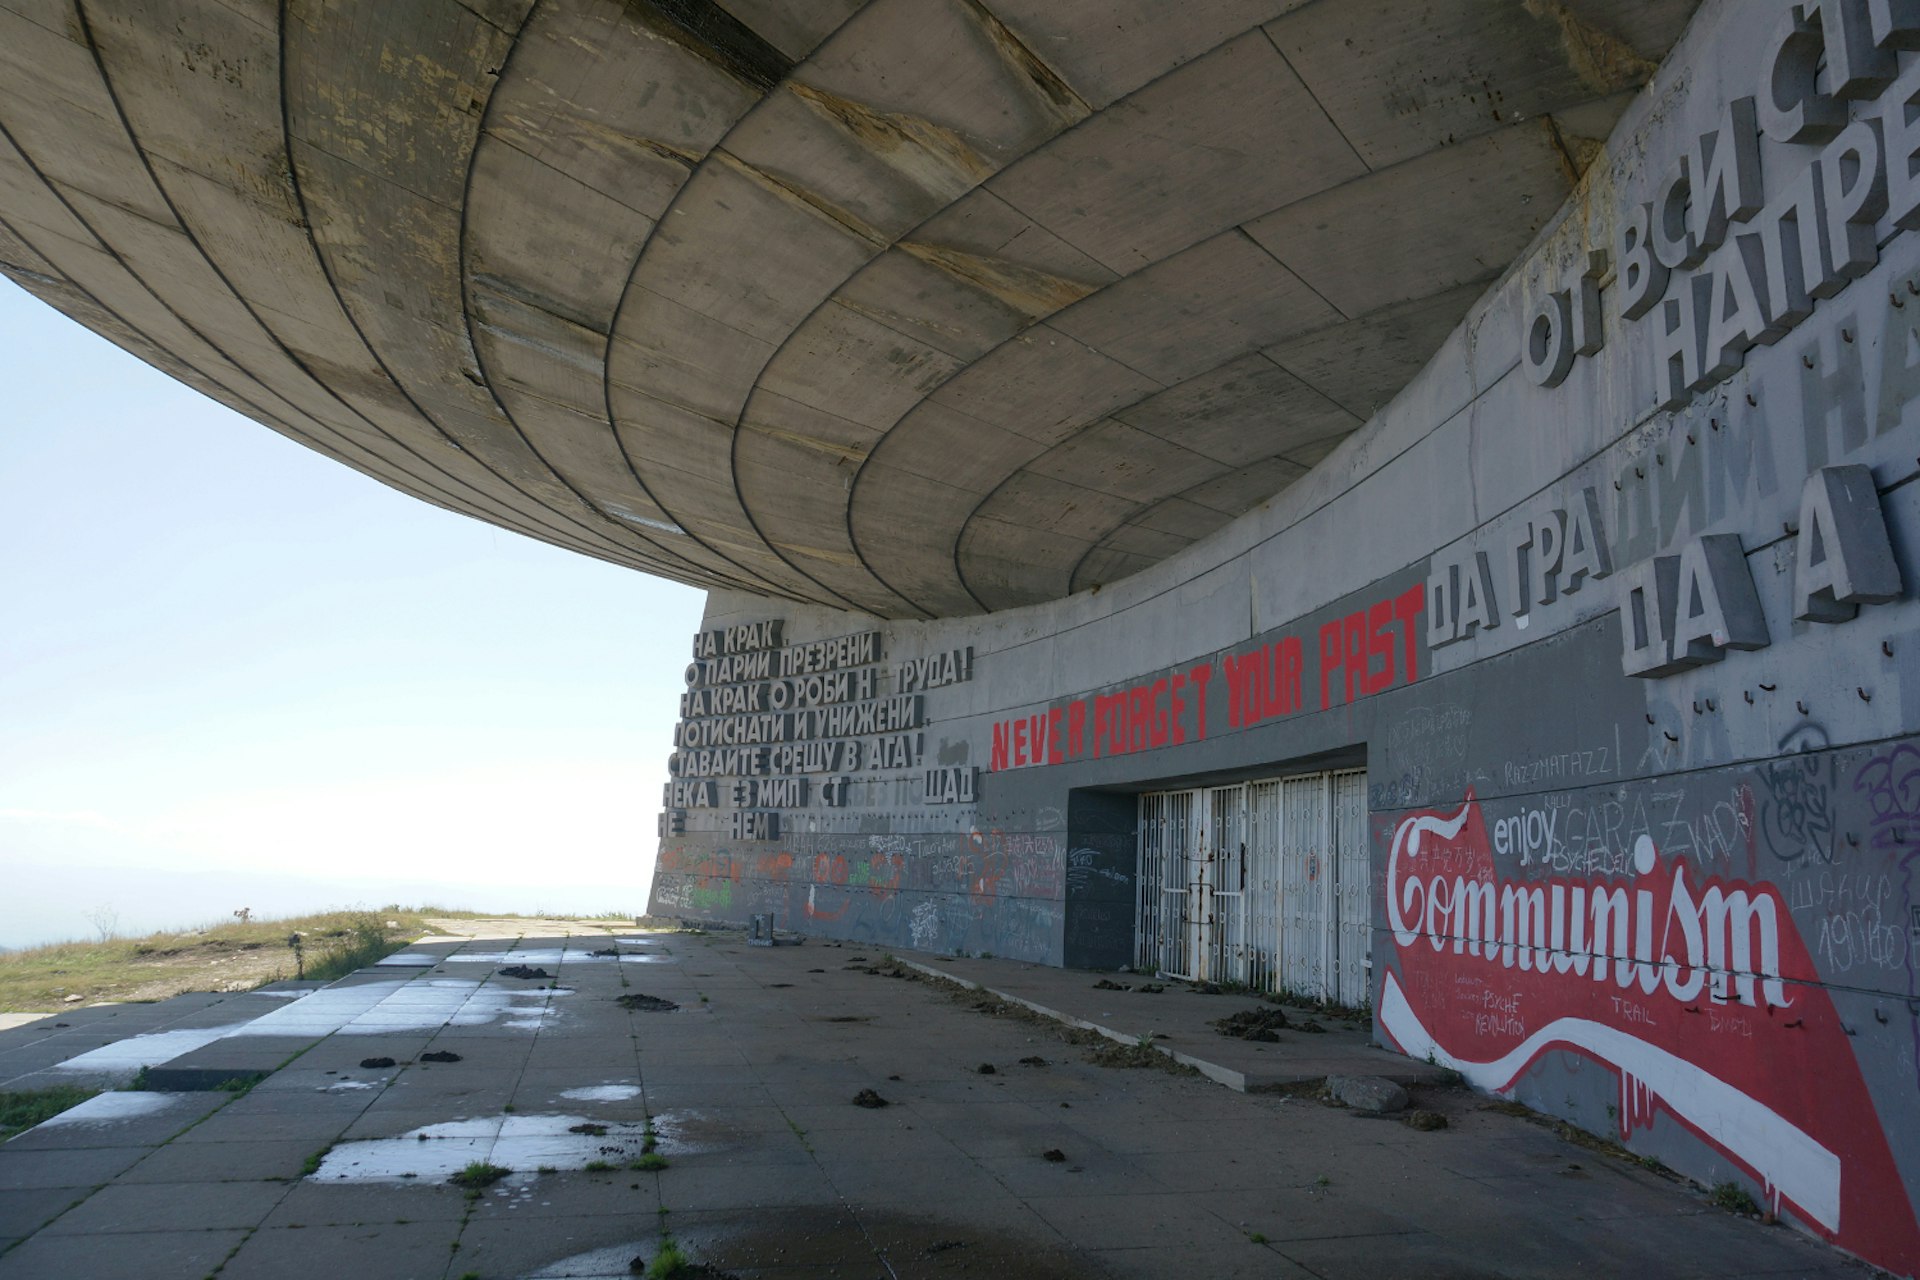 Local authorities recently bolted the entrance to the Buzludzha monument © Anita Isalska / Lonely Planet